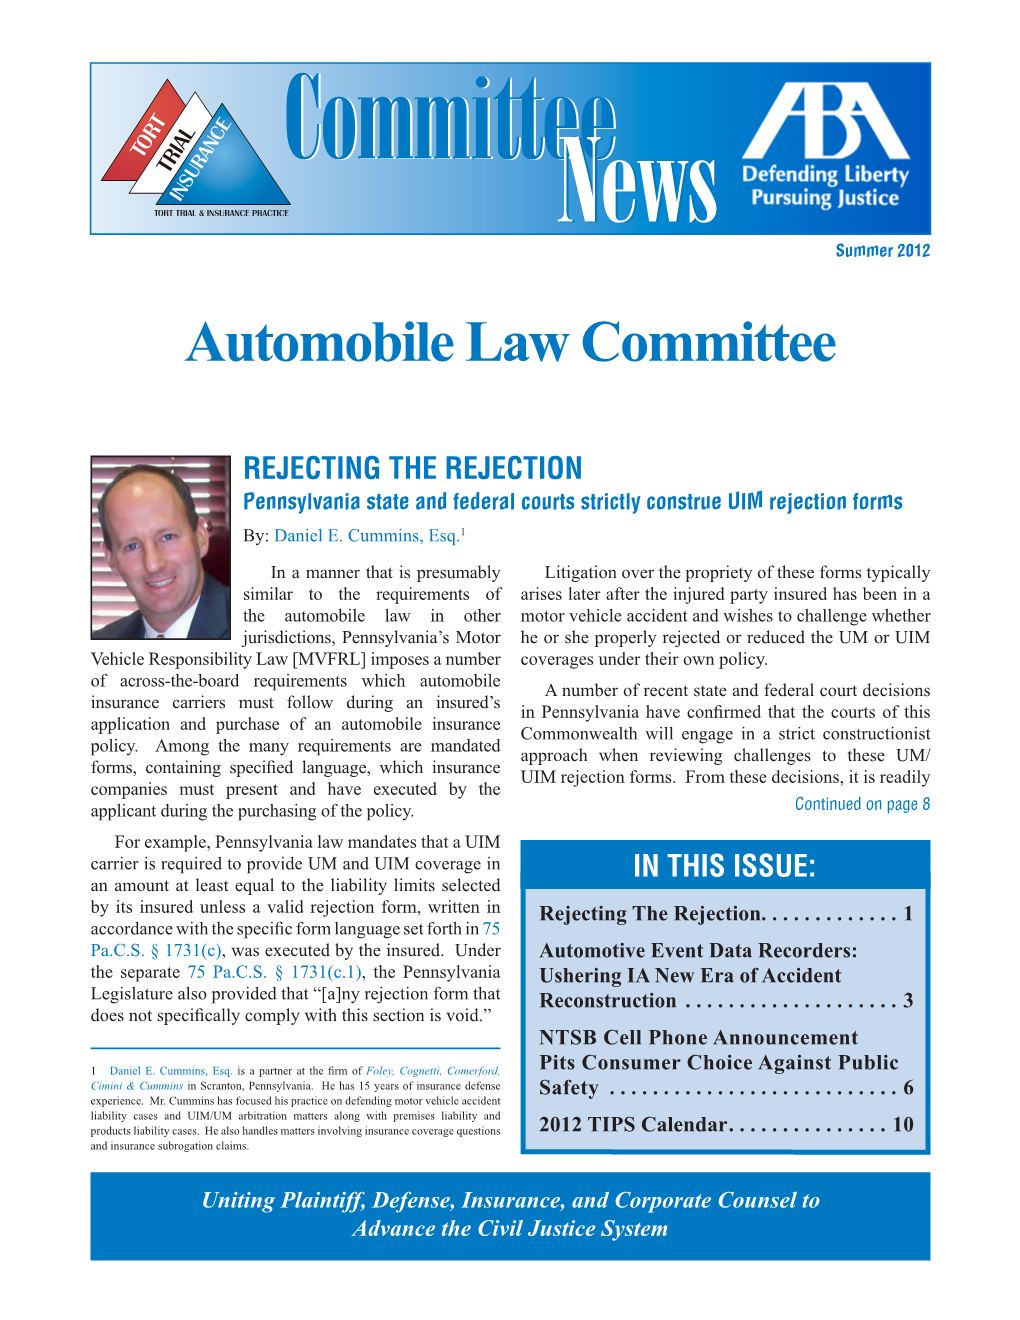 Automobile Law Committee Newsletter Summer 2012